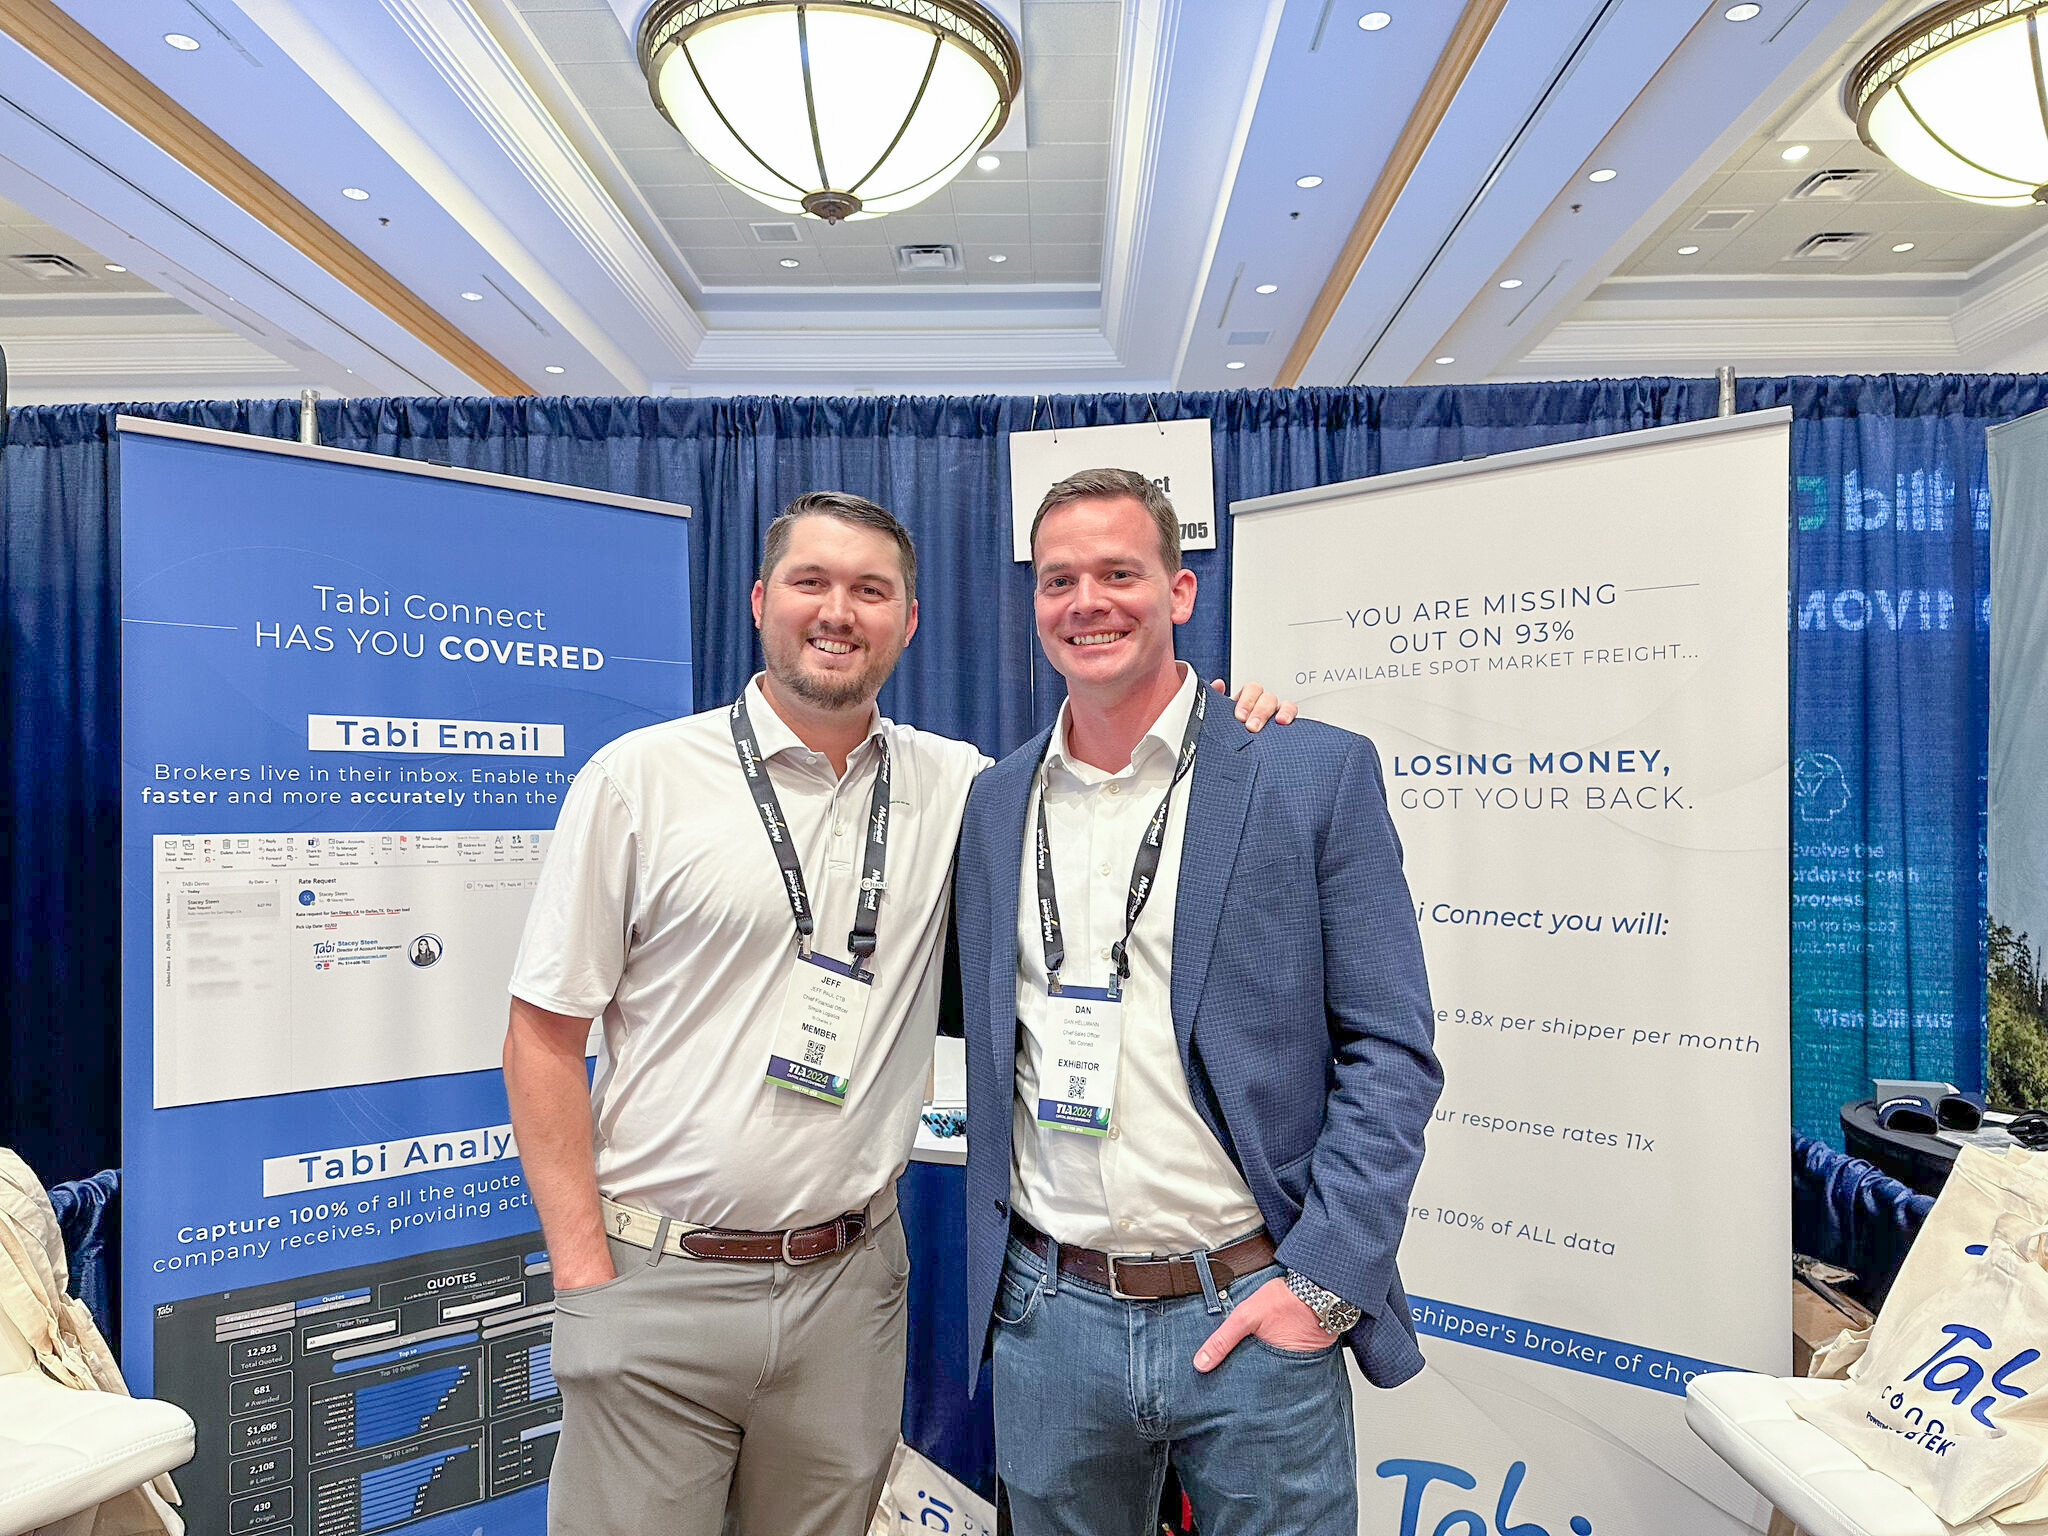 Jeff Paul stands with Dan Hellmann, CSO at Tabi Connect, in front of a booth at the FSA Conference